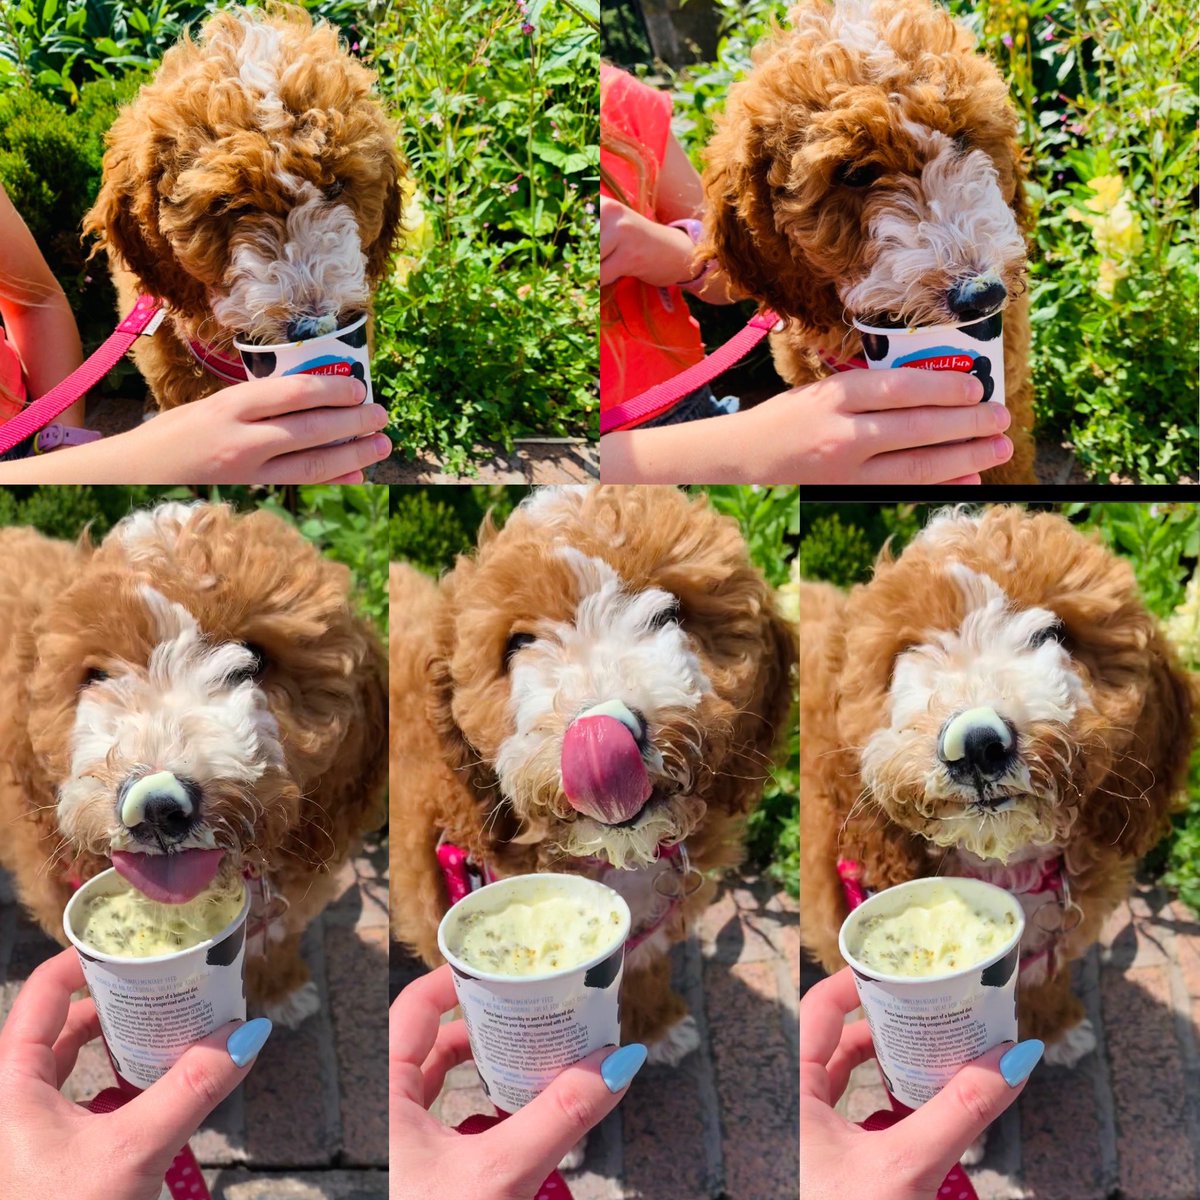 @TelfordWrekin @GreatDawley @LoveWellington1 @OakengatesTC @MadeleyTC @CllrShirleyR @Rich4StGeorges @Cllrldcarter @CllrShaunDavies @David_Sidaway1 @CarolynHealy We had a great time in Ironbridge yesterday, lovely ice cream (doggy version too!), great entertainment and wonderful sunshine! Thanks to everyone for putting on such a great event. 😊